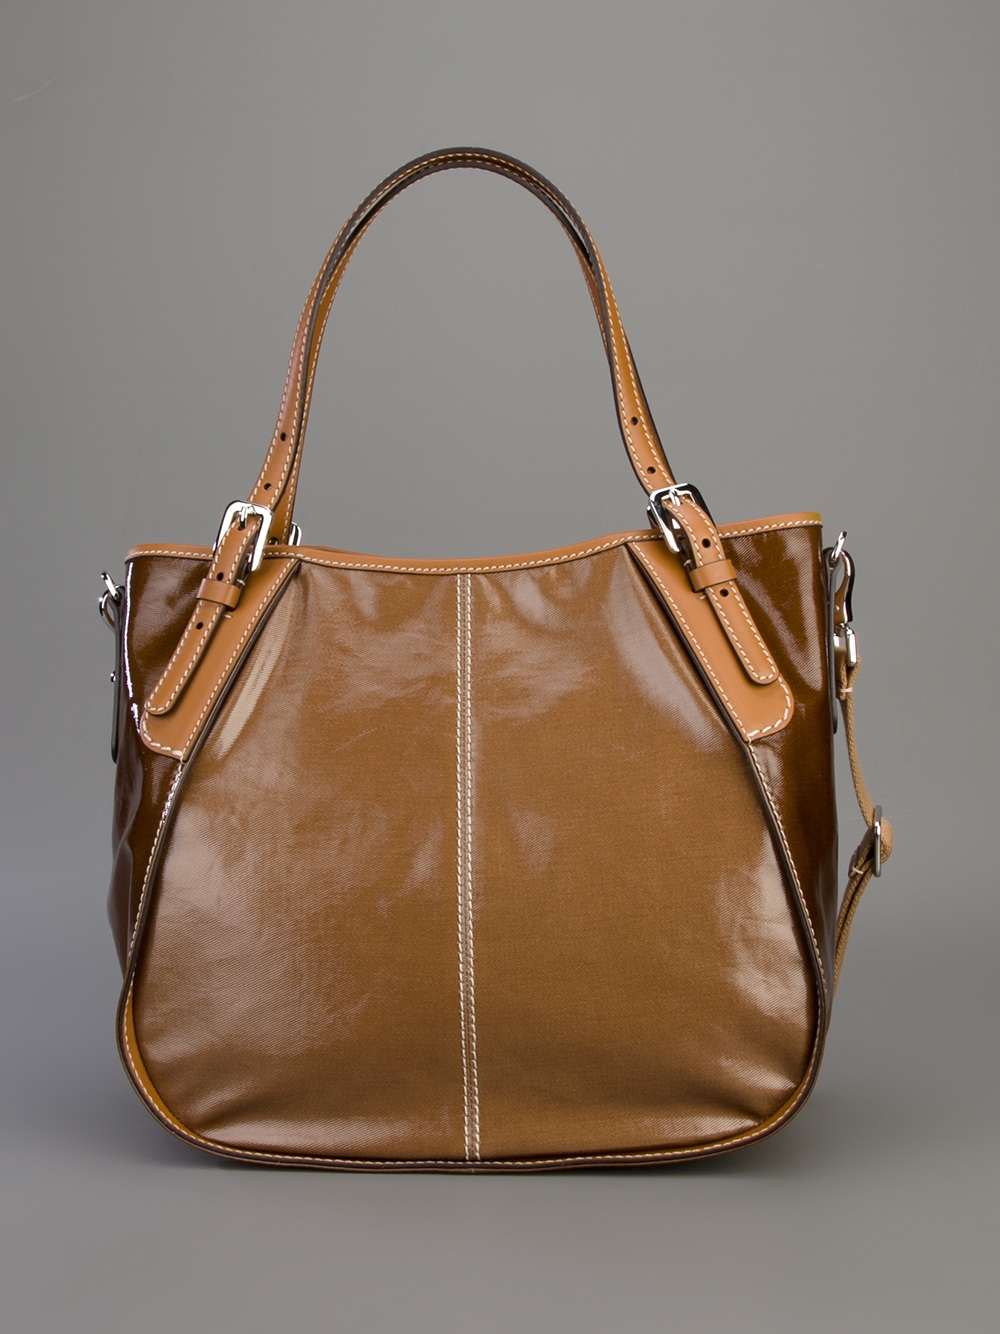 Tod's G Sacca Leather Bag in Brown - Lyst